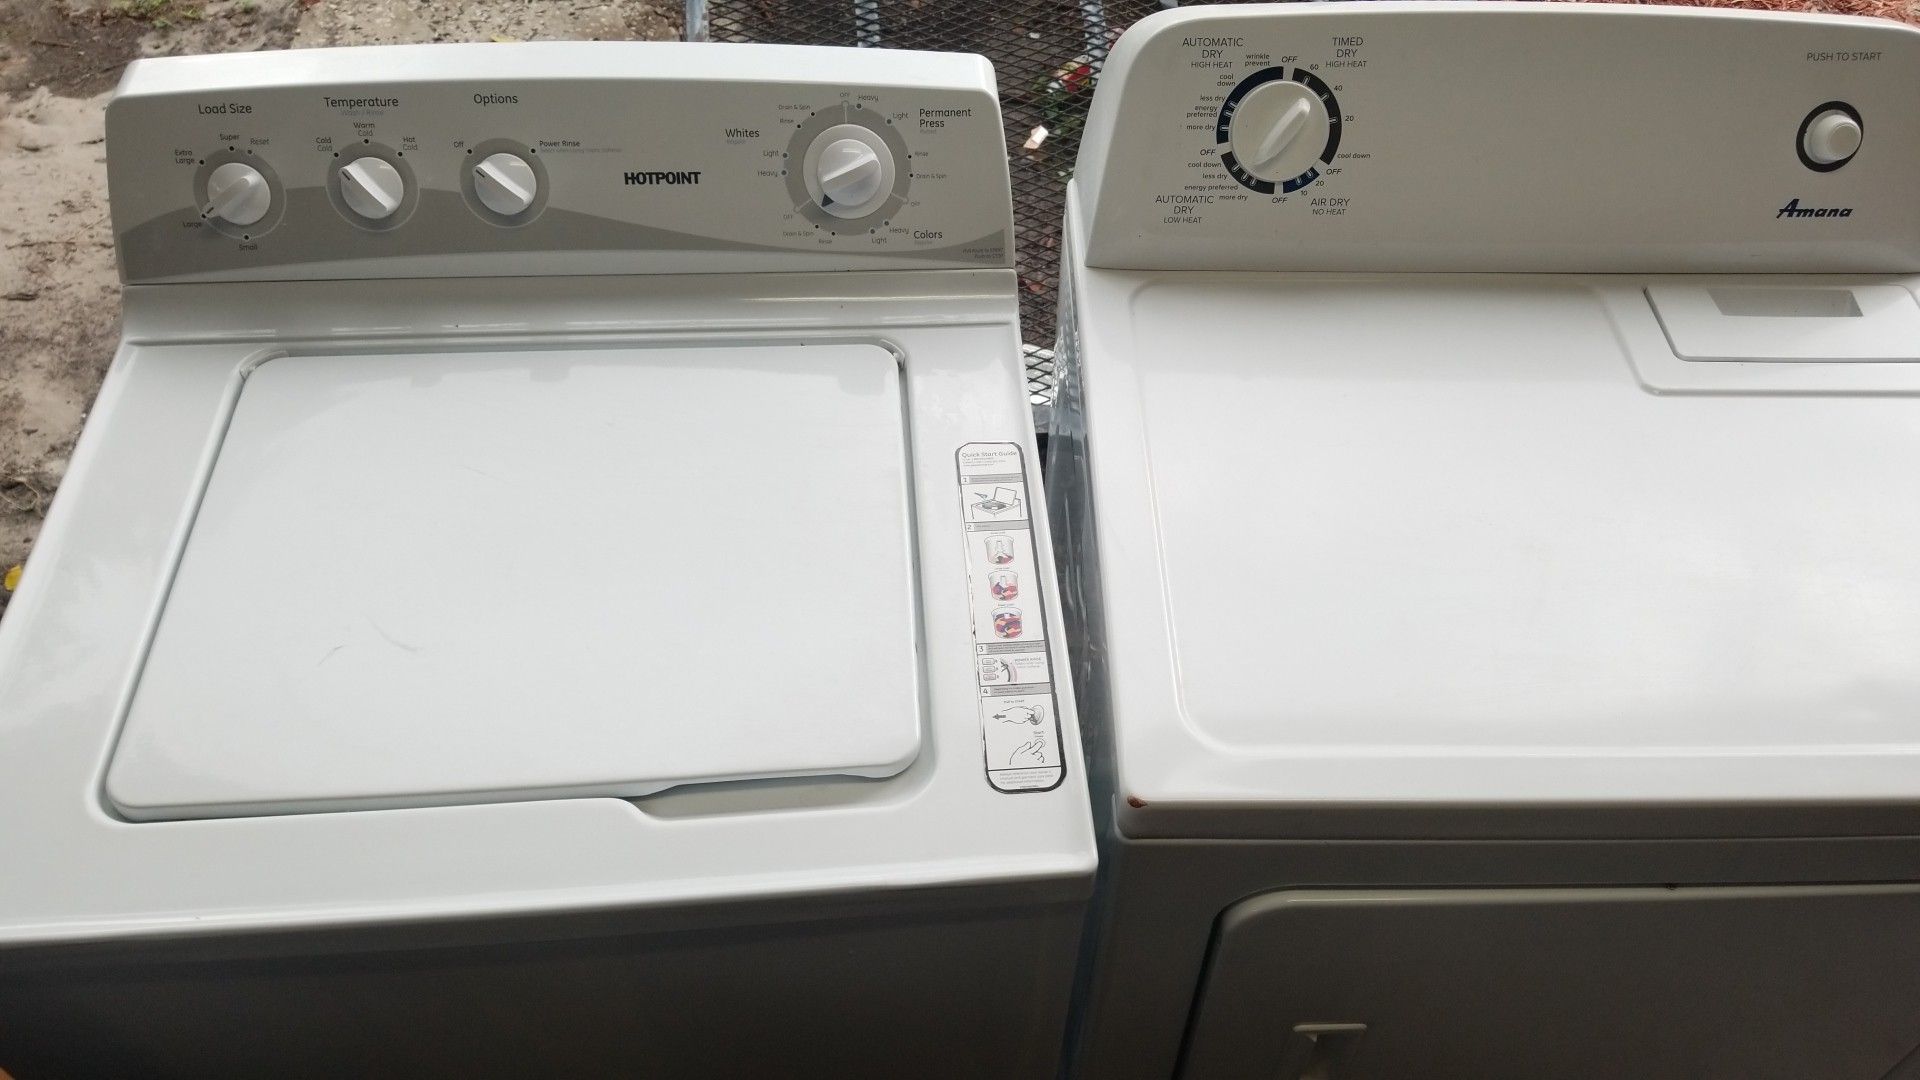 Washer and Dryer set